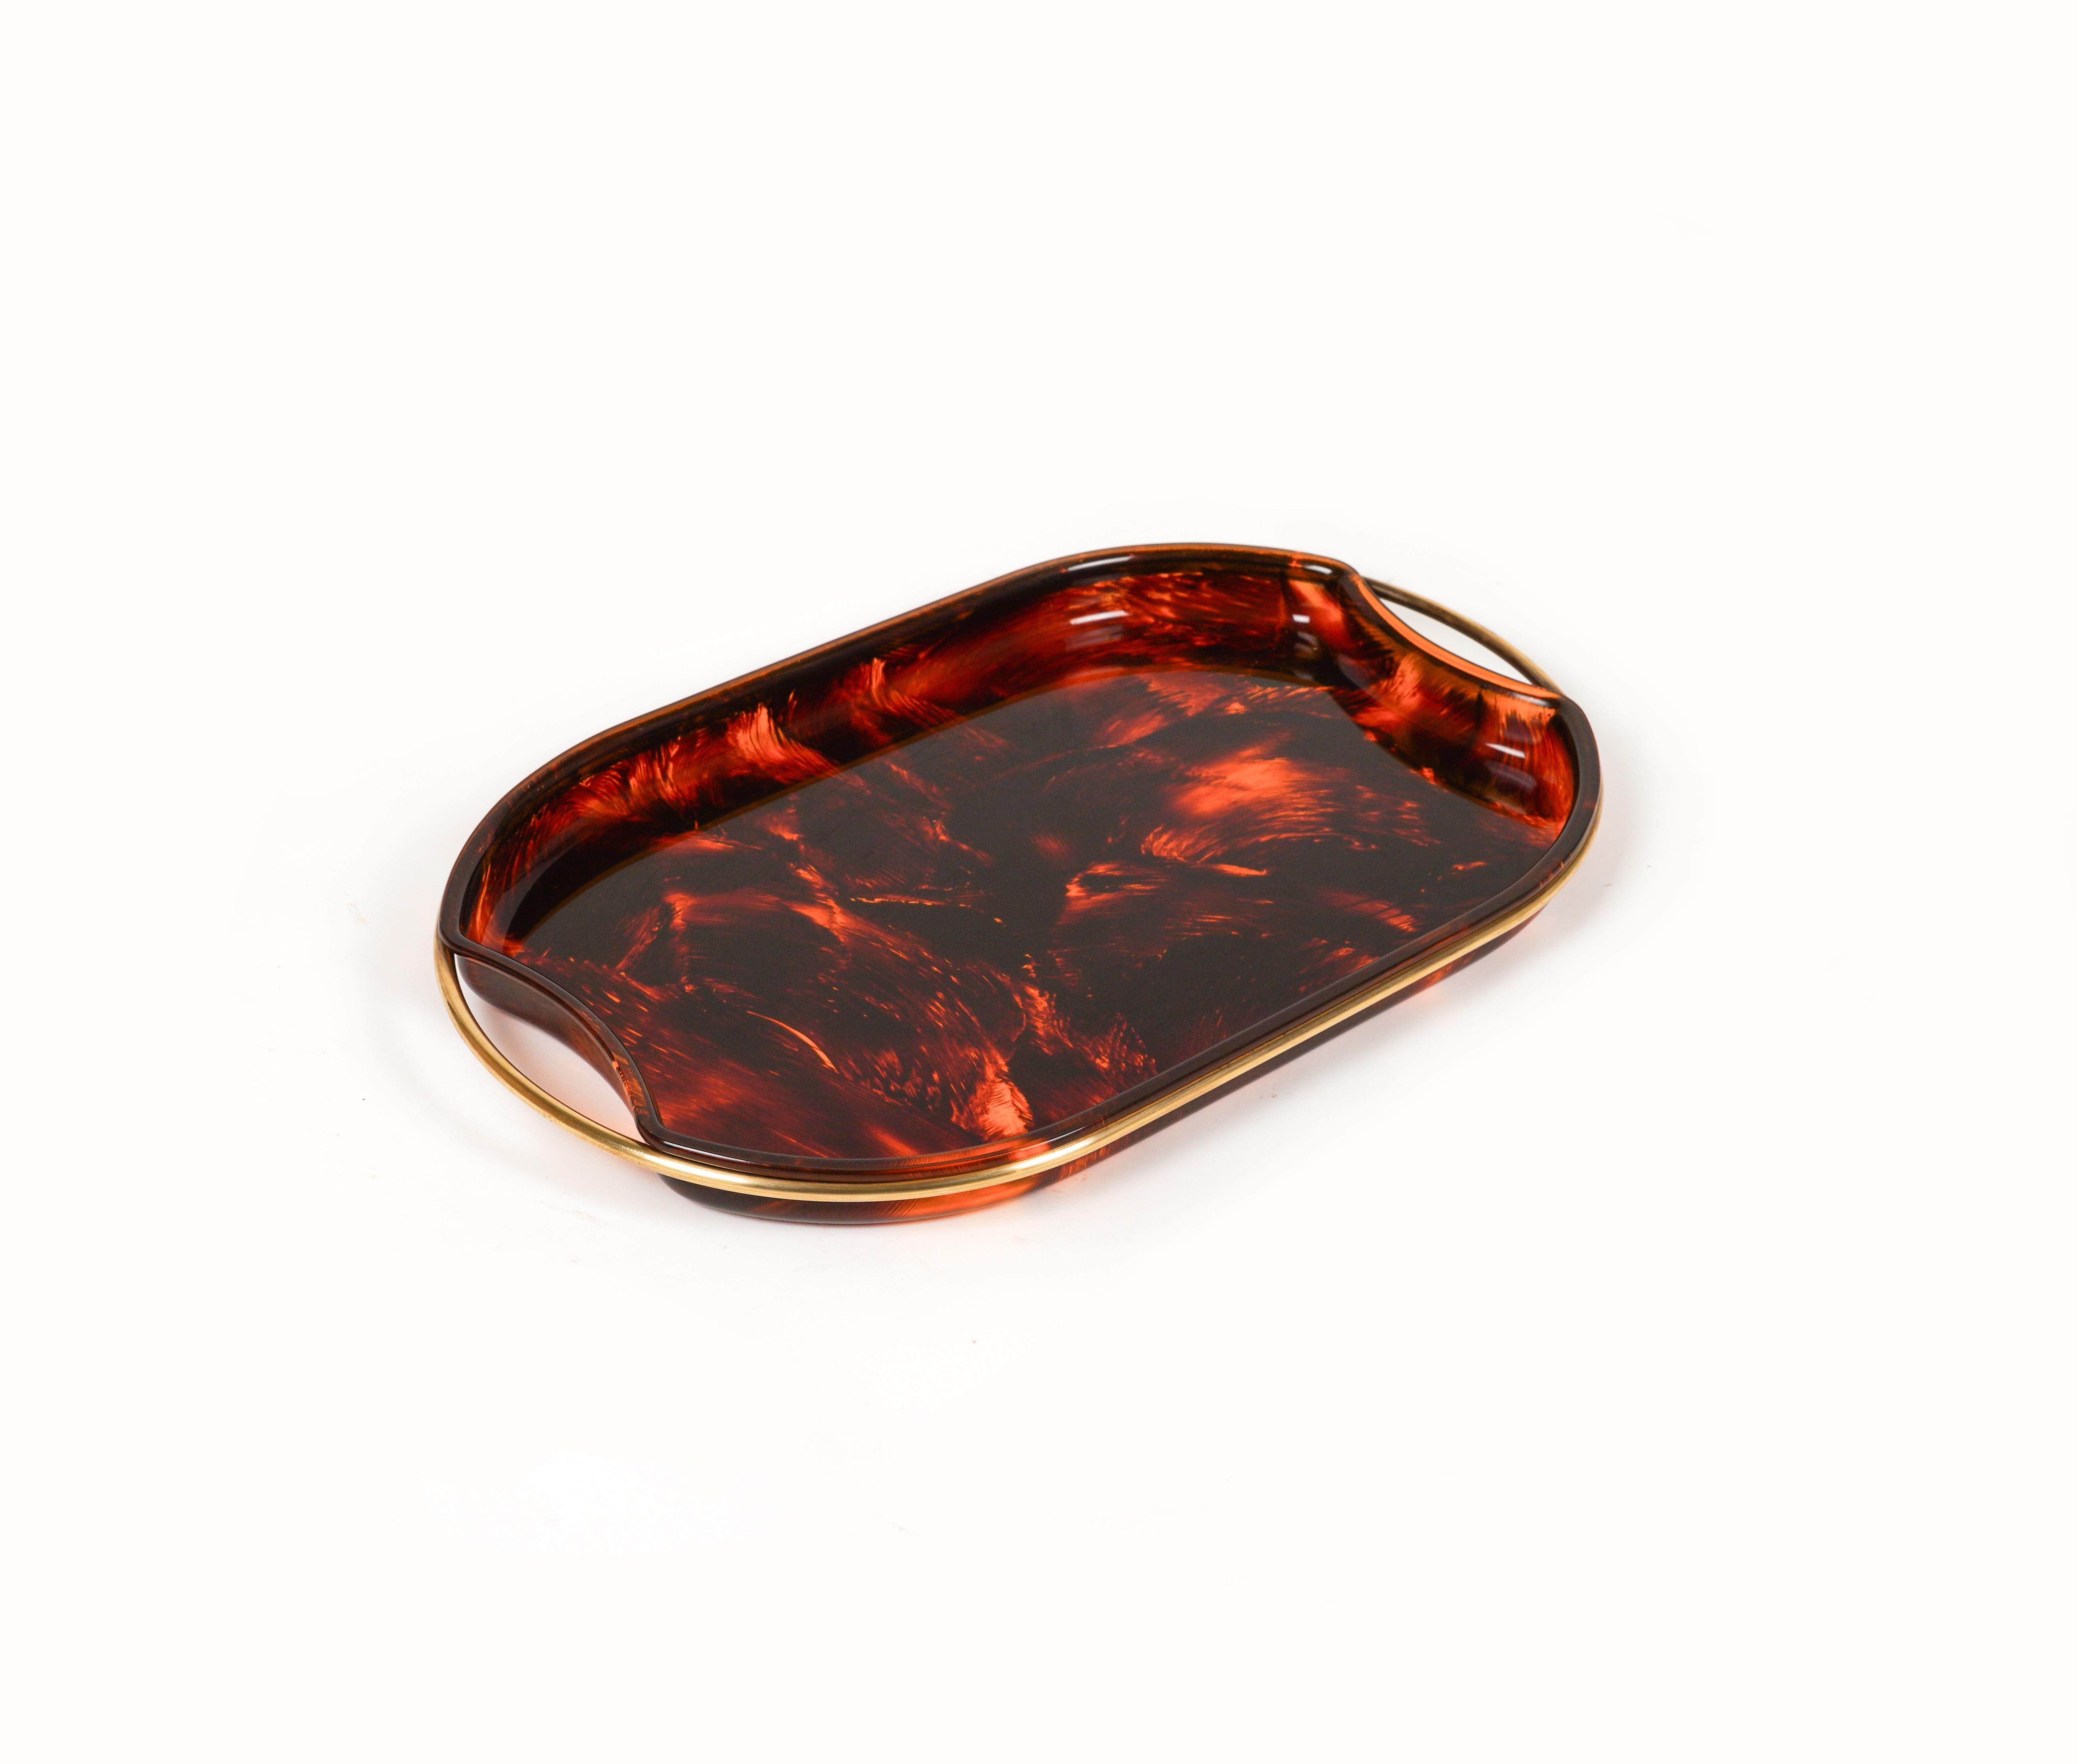 Mid-Century Modern Oval Serving Tray in Effect Tortoiseshell Lucite & Brass by Guzzini, Italy 1970s For Sale